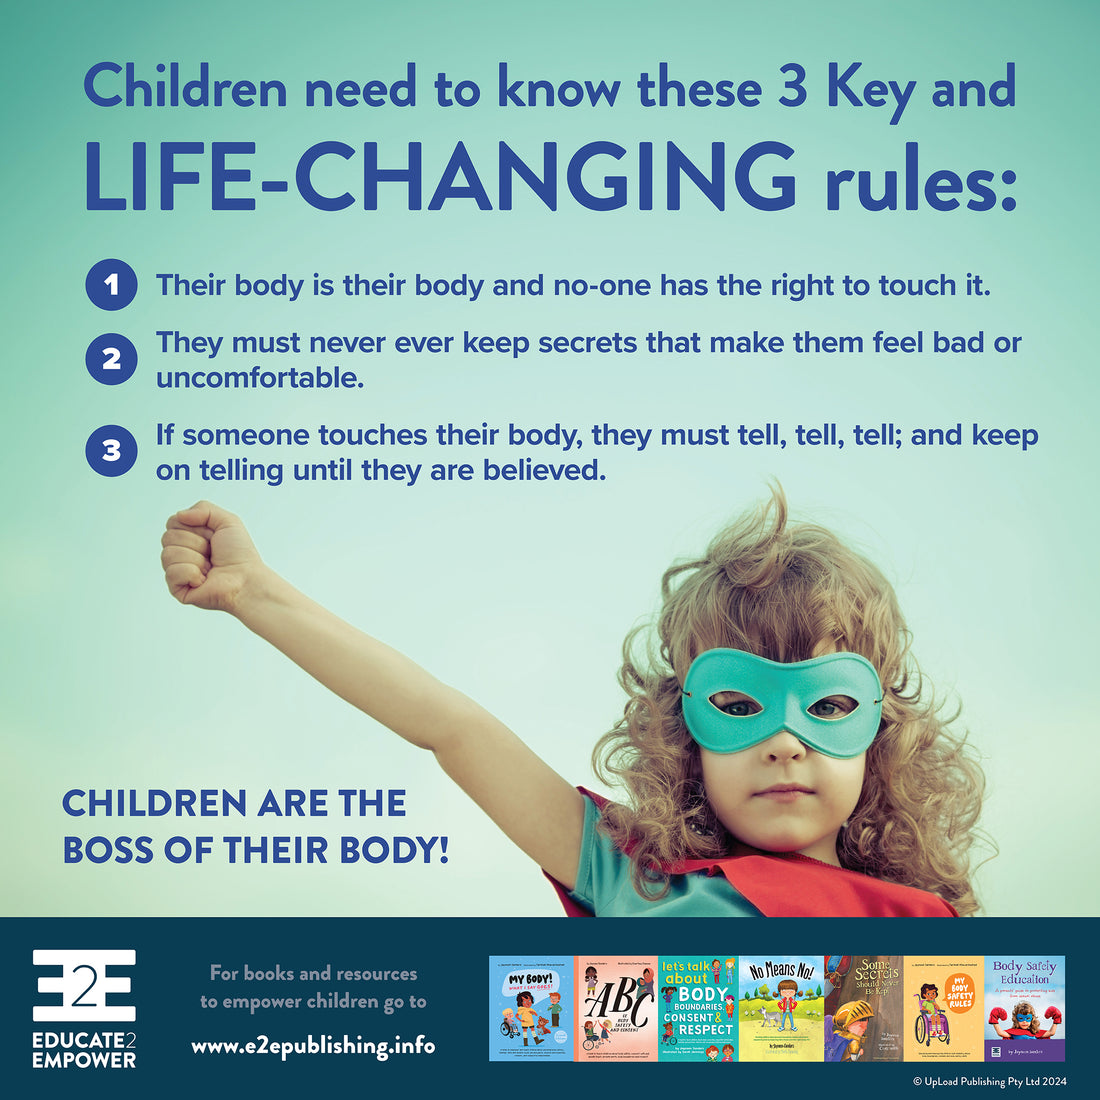 Children need to know these 3 Key and LIFE-CHANGING rules